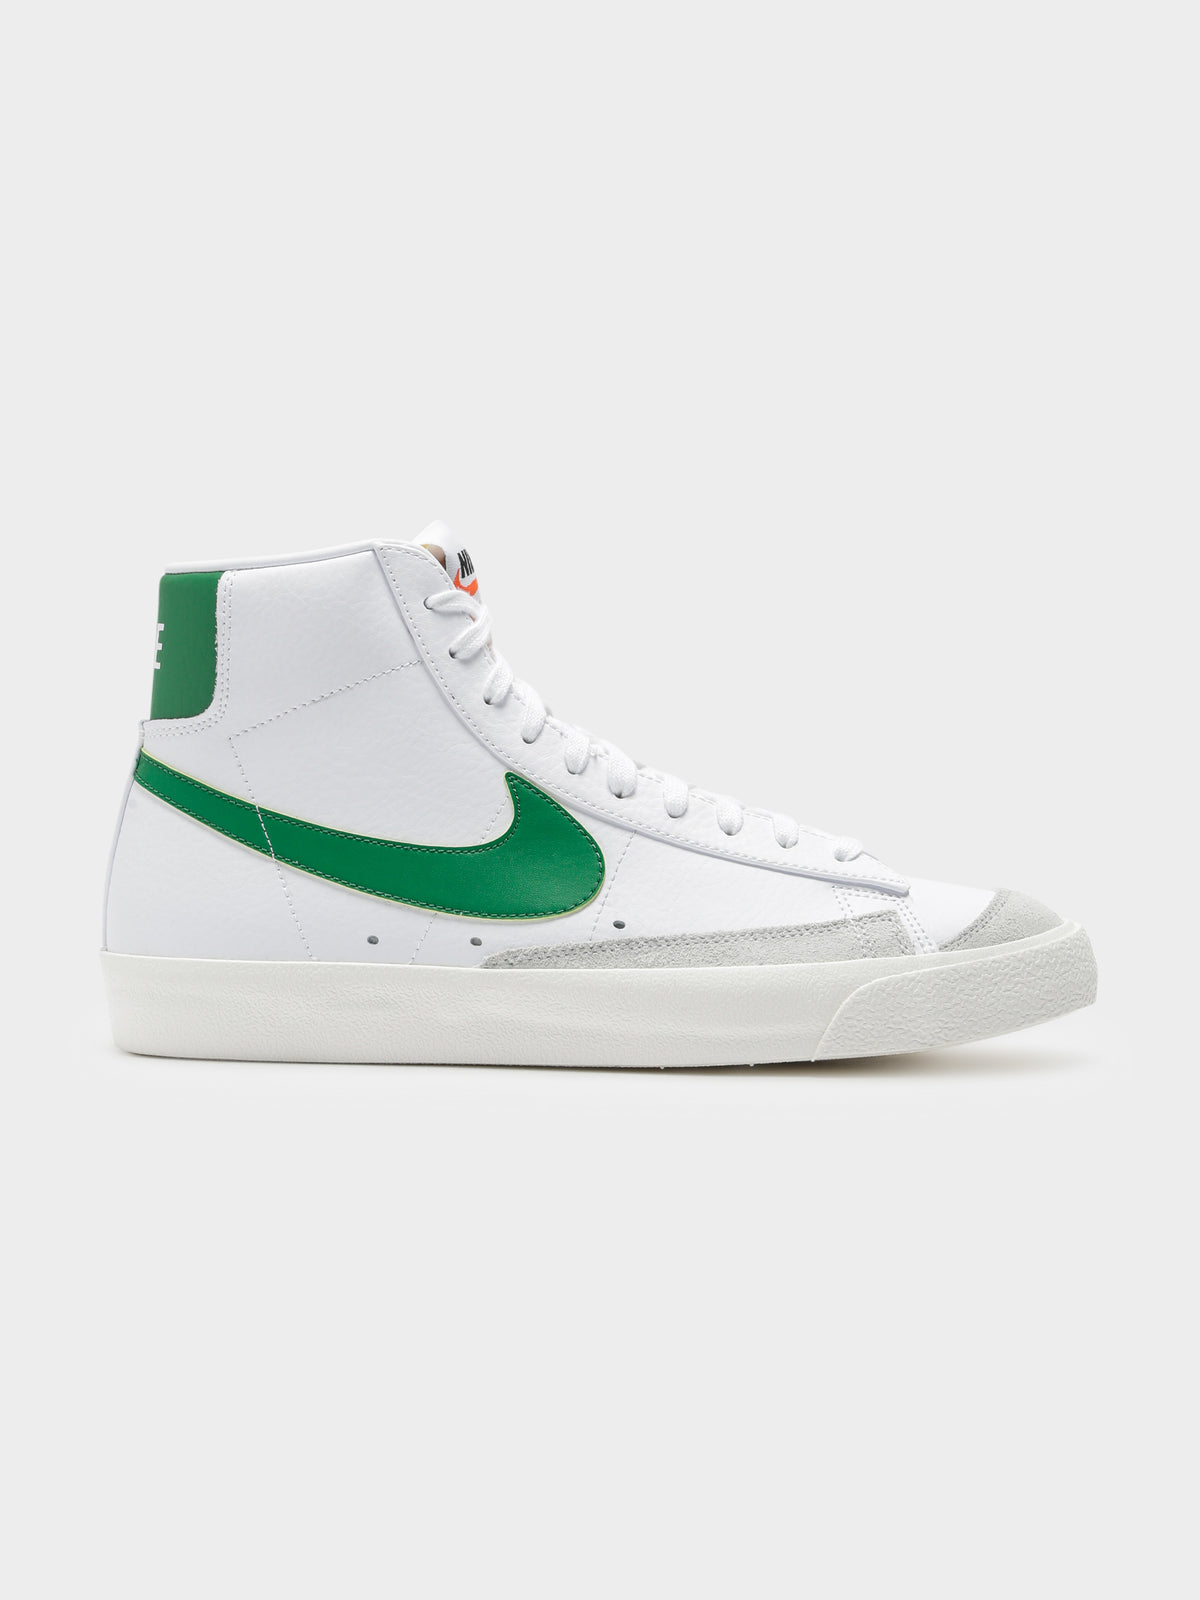 Mens Blazer Mid 77 High Top Sneakers in Green &amp; White